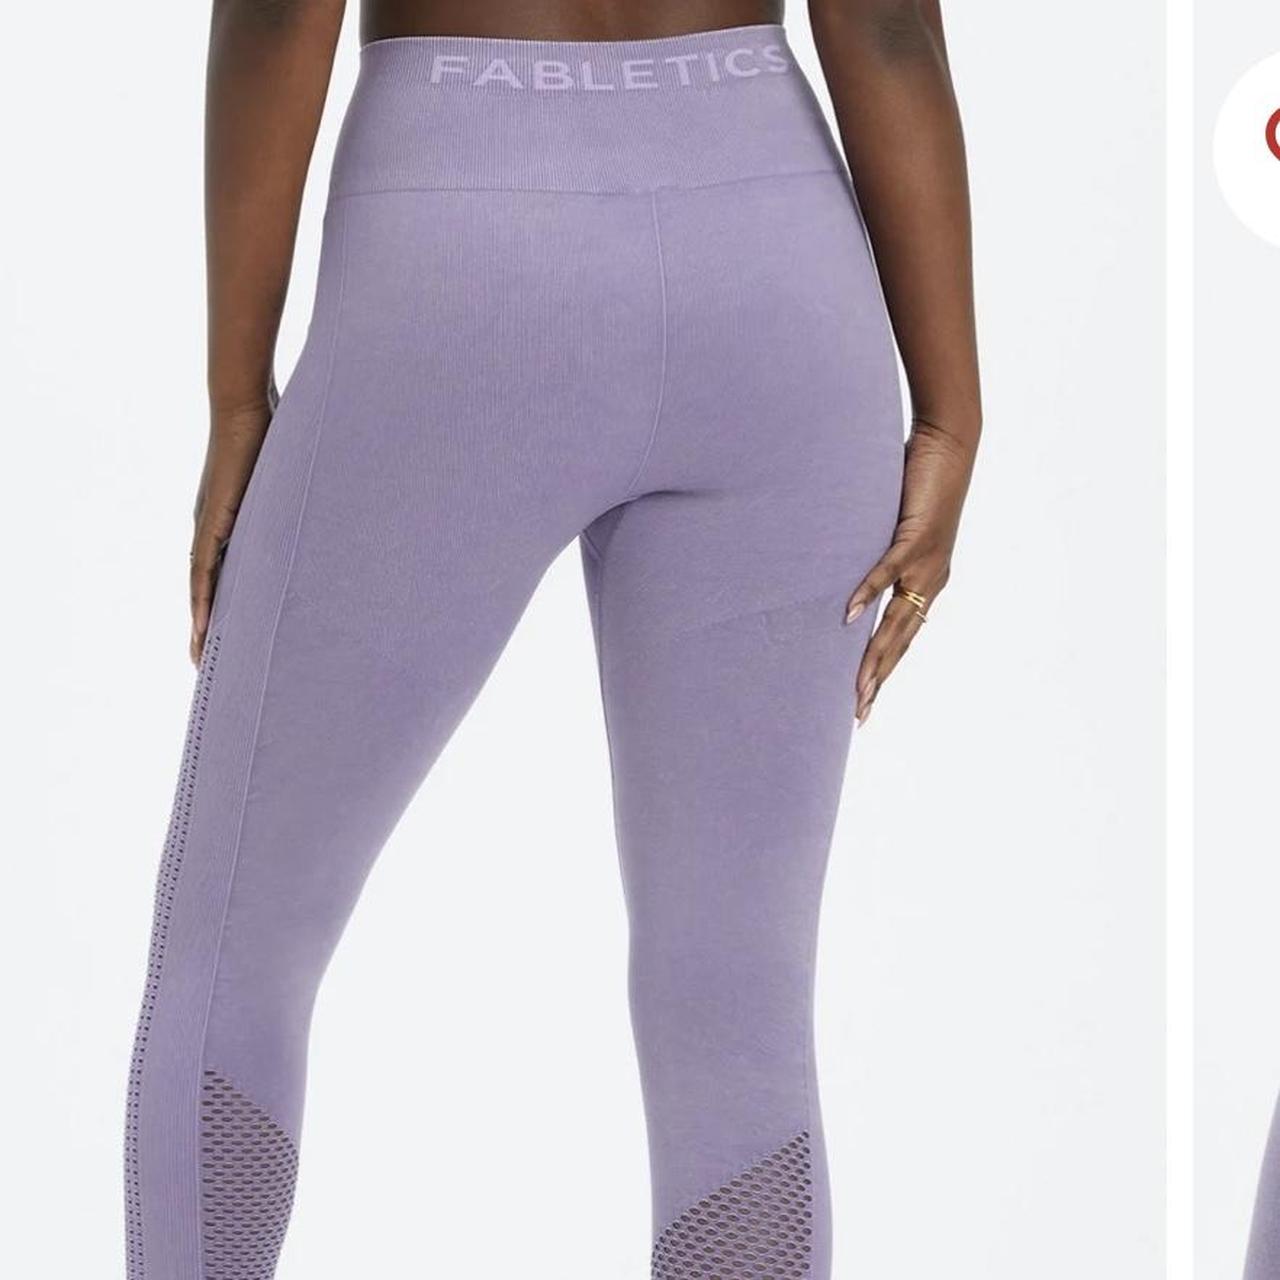 Fabletics Large Seamless High Waisted Leggings. The - Depop